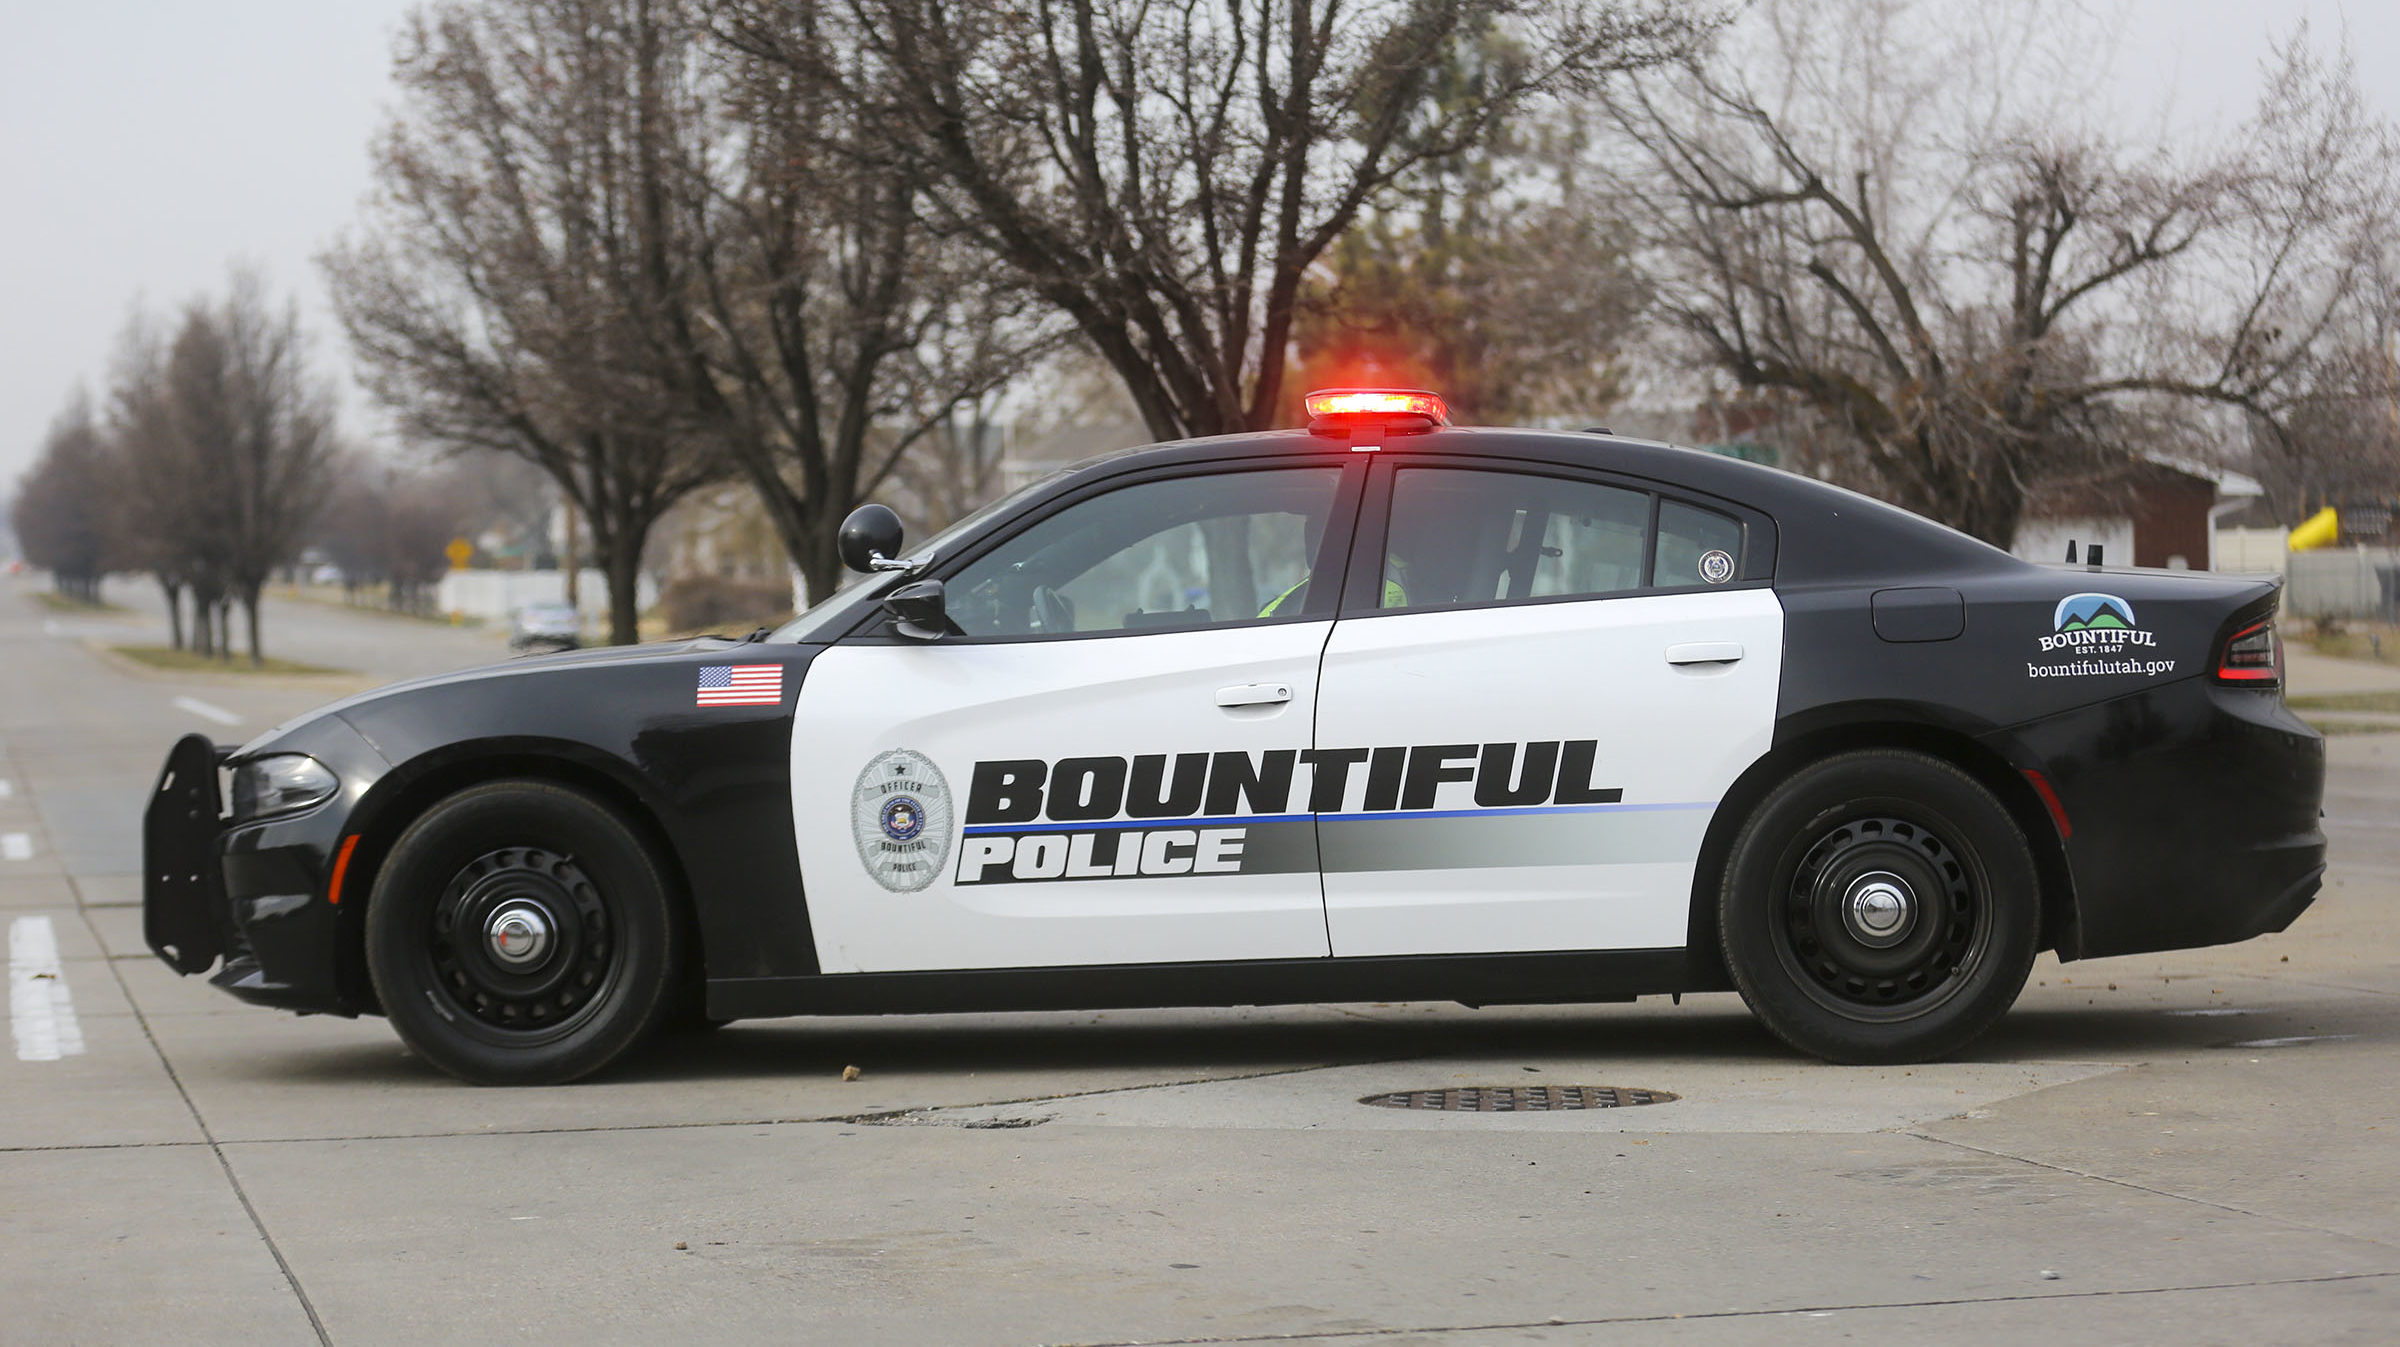 A Bountiful police vehicle is pictured in Bountiful on Thursday, Dec. 10, 2020. (Kristin Murphy/Des...